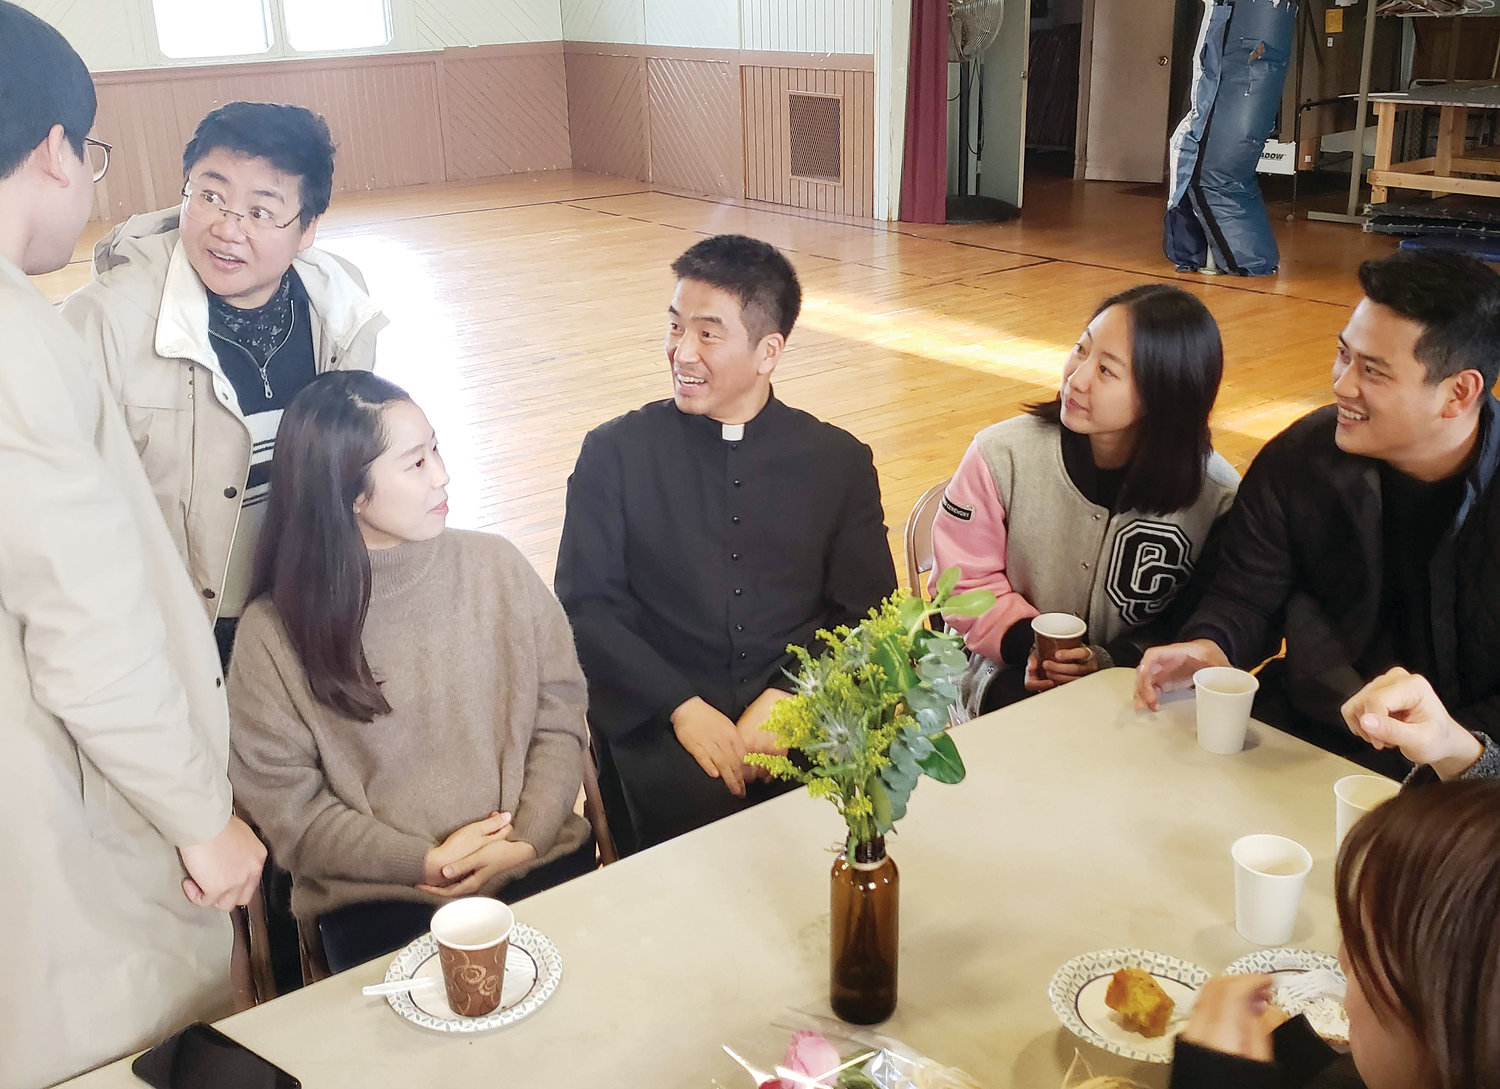 Father Jaekyu Lee, Chaplain to Rhode Island’s Catholic Korean community and assistant pastor at St. Paul Church in Cranston, visits with Korean faithful after Mass.